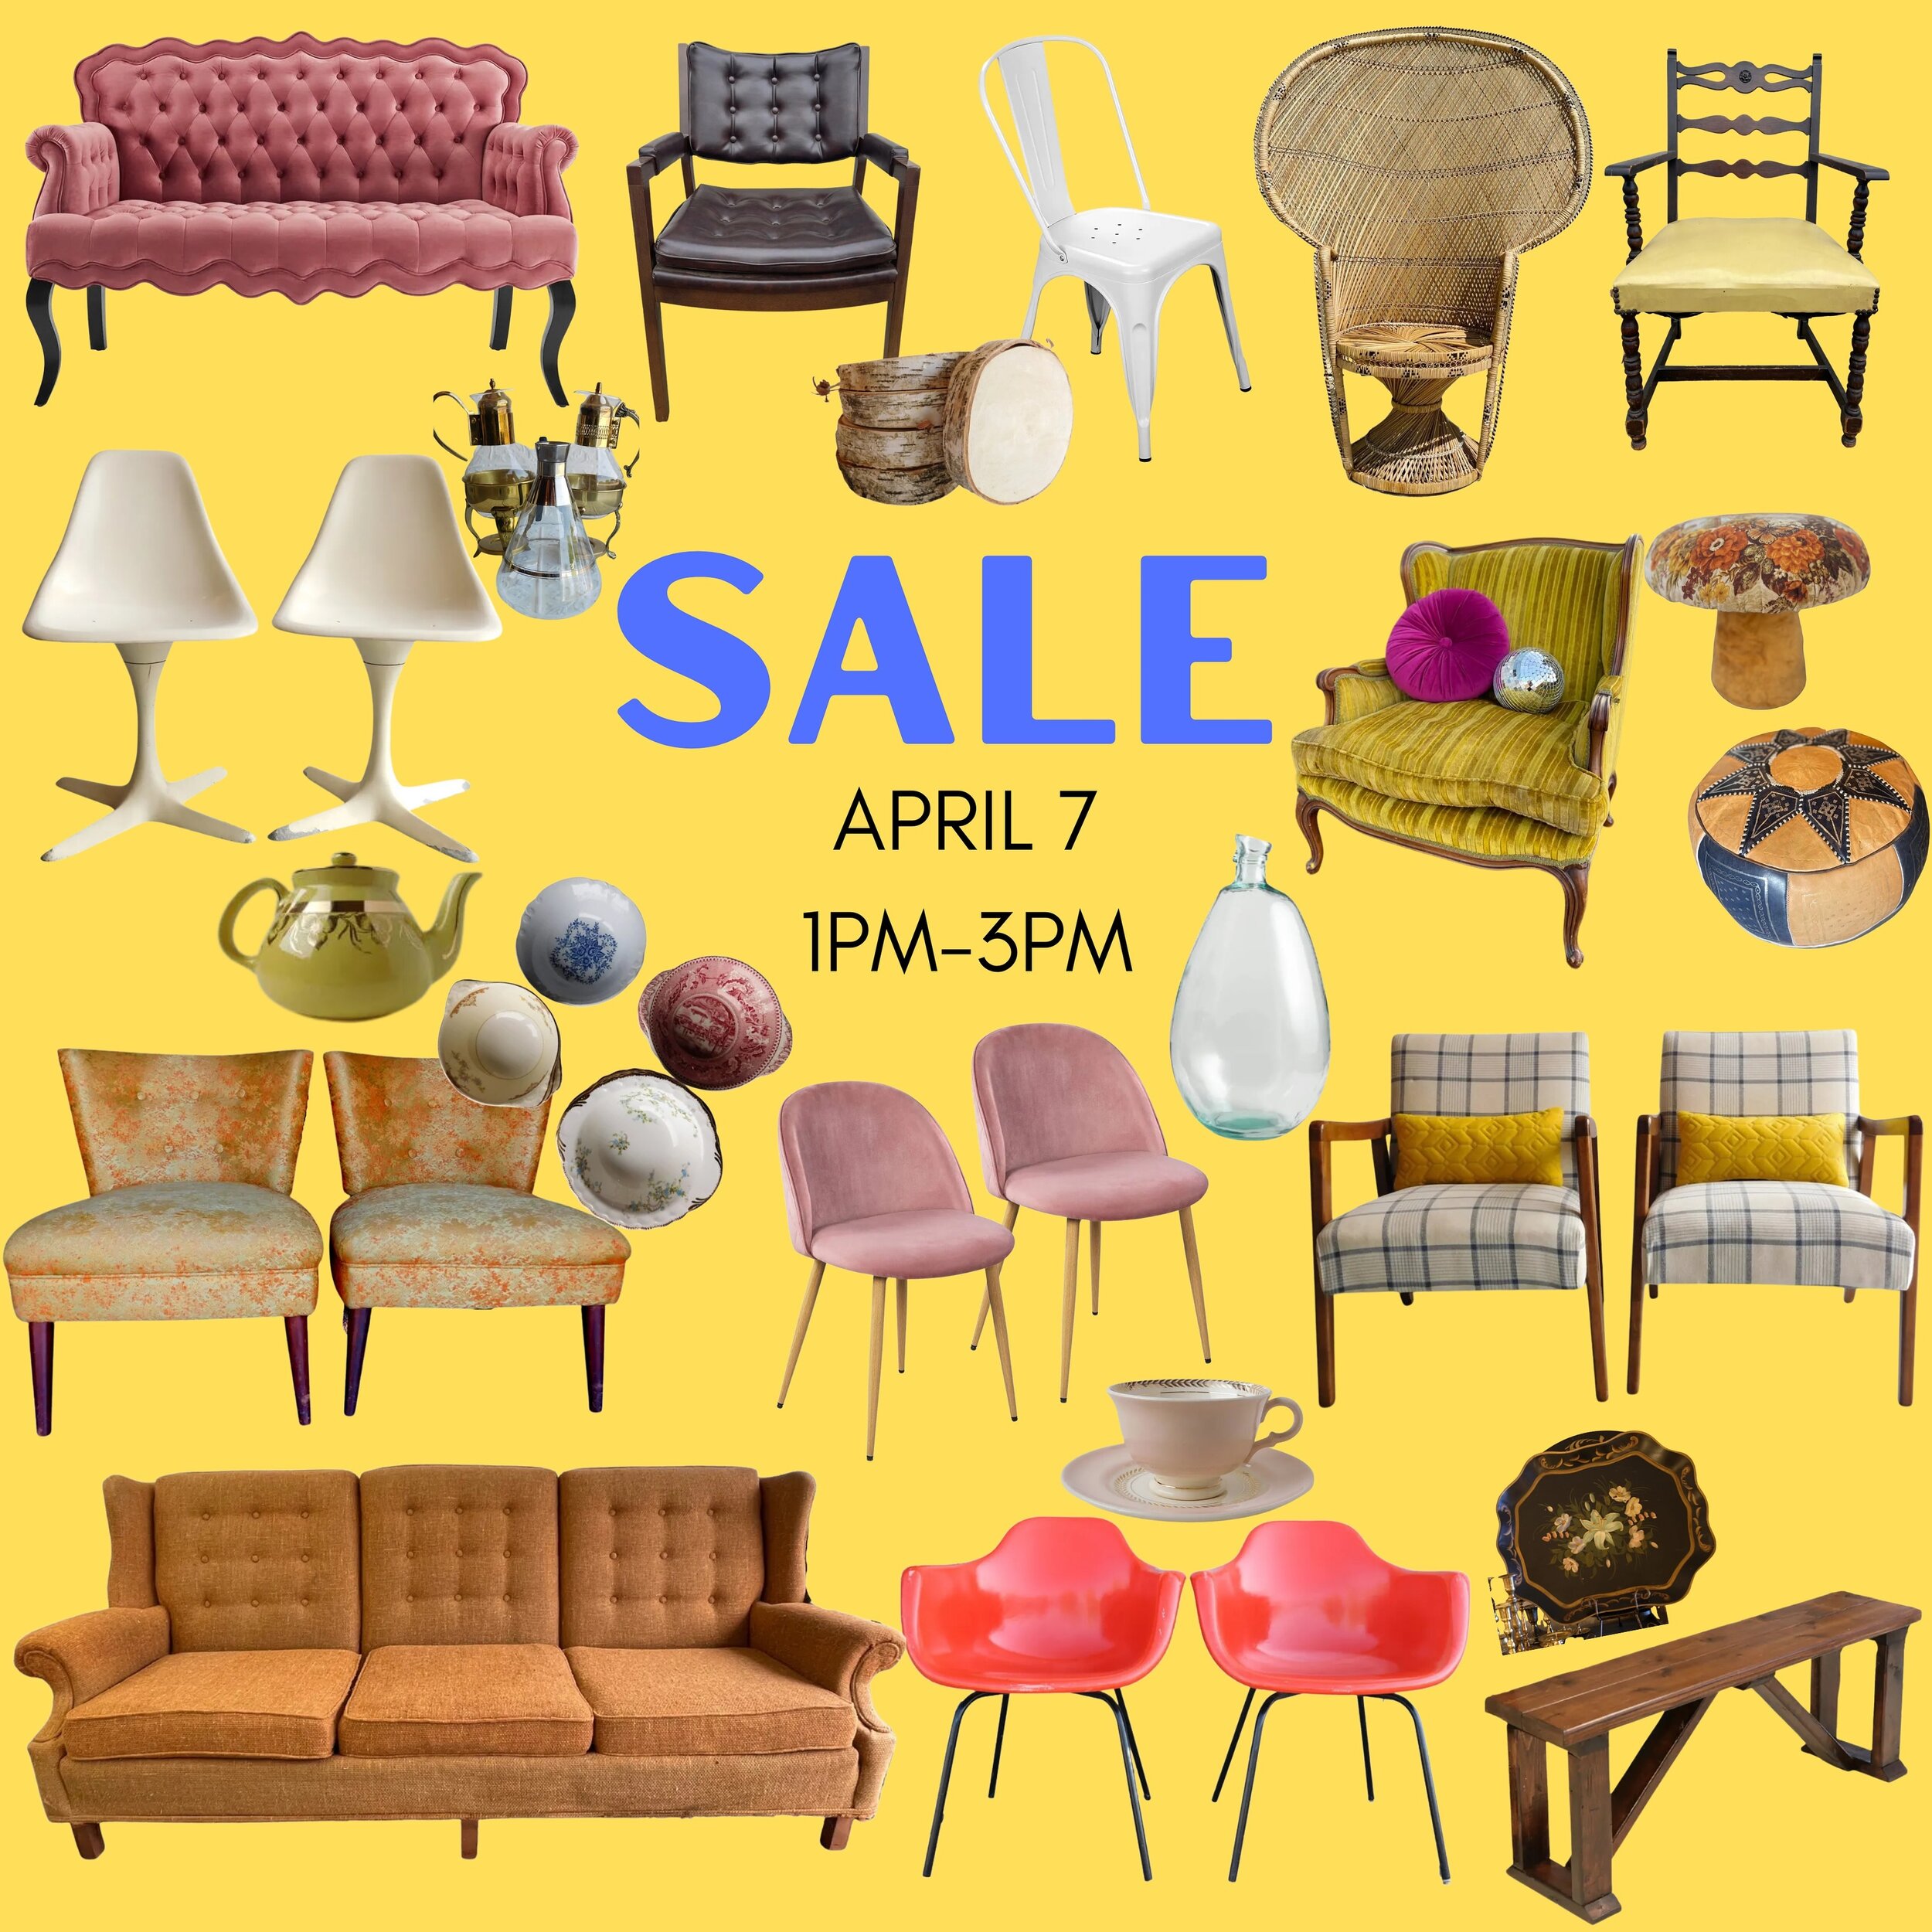 📣 Announcing our biggest sale yet 🚨 BEAUTIFUL finds at RIDICULOUS prices. Write it down and don&rsquo;t forget: April 7, 1PM-3PM, 917 Walsh Rd., #112, Madison, WI. Couches, MCM chairs, our handcrafted benches, and lots of smallware! First come firs